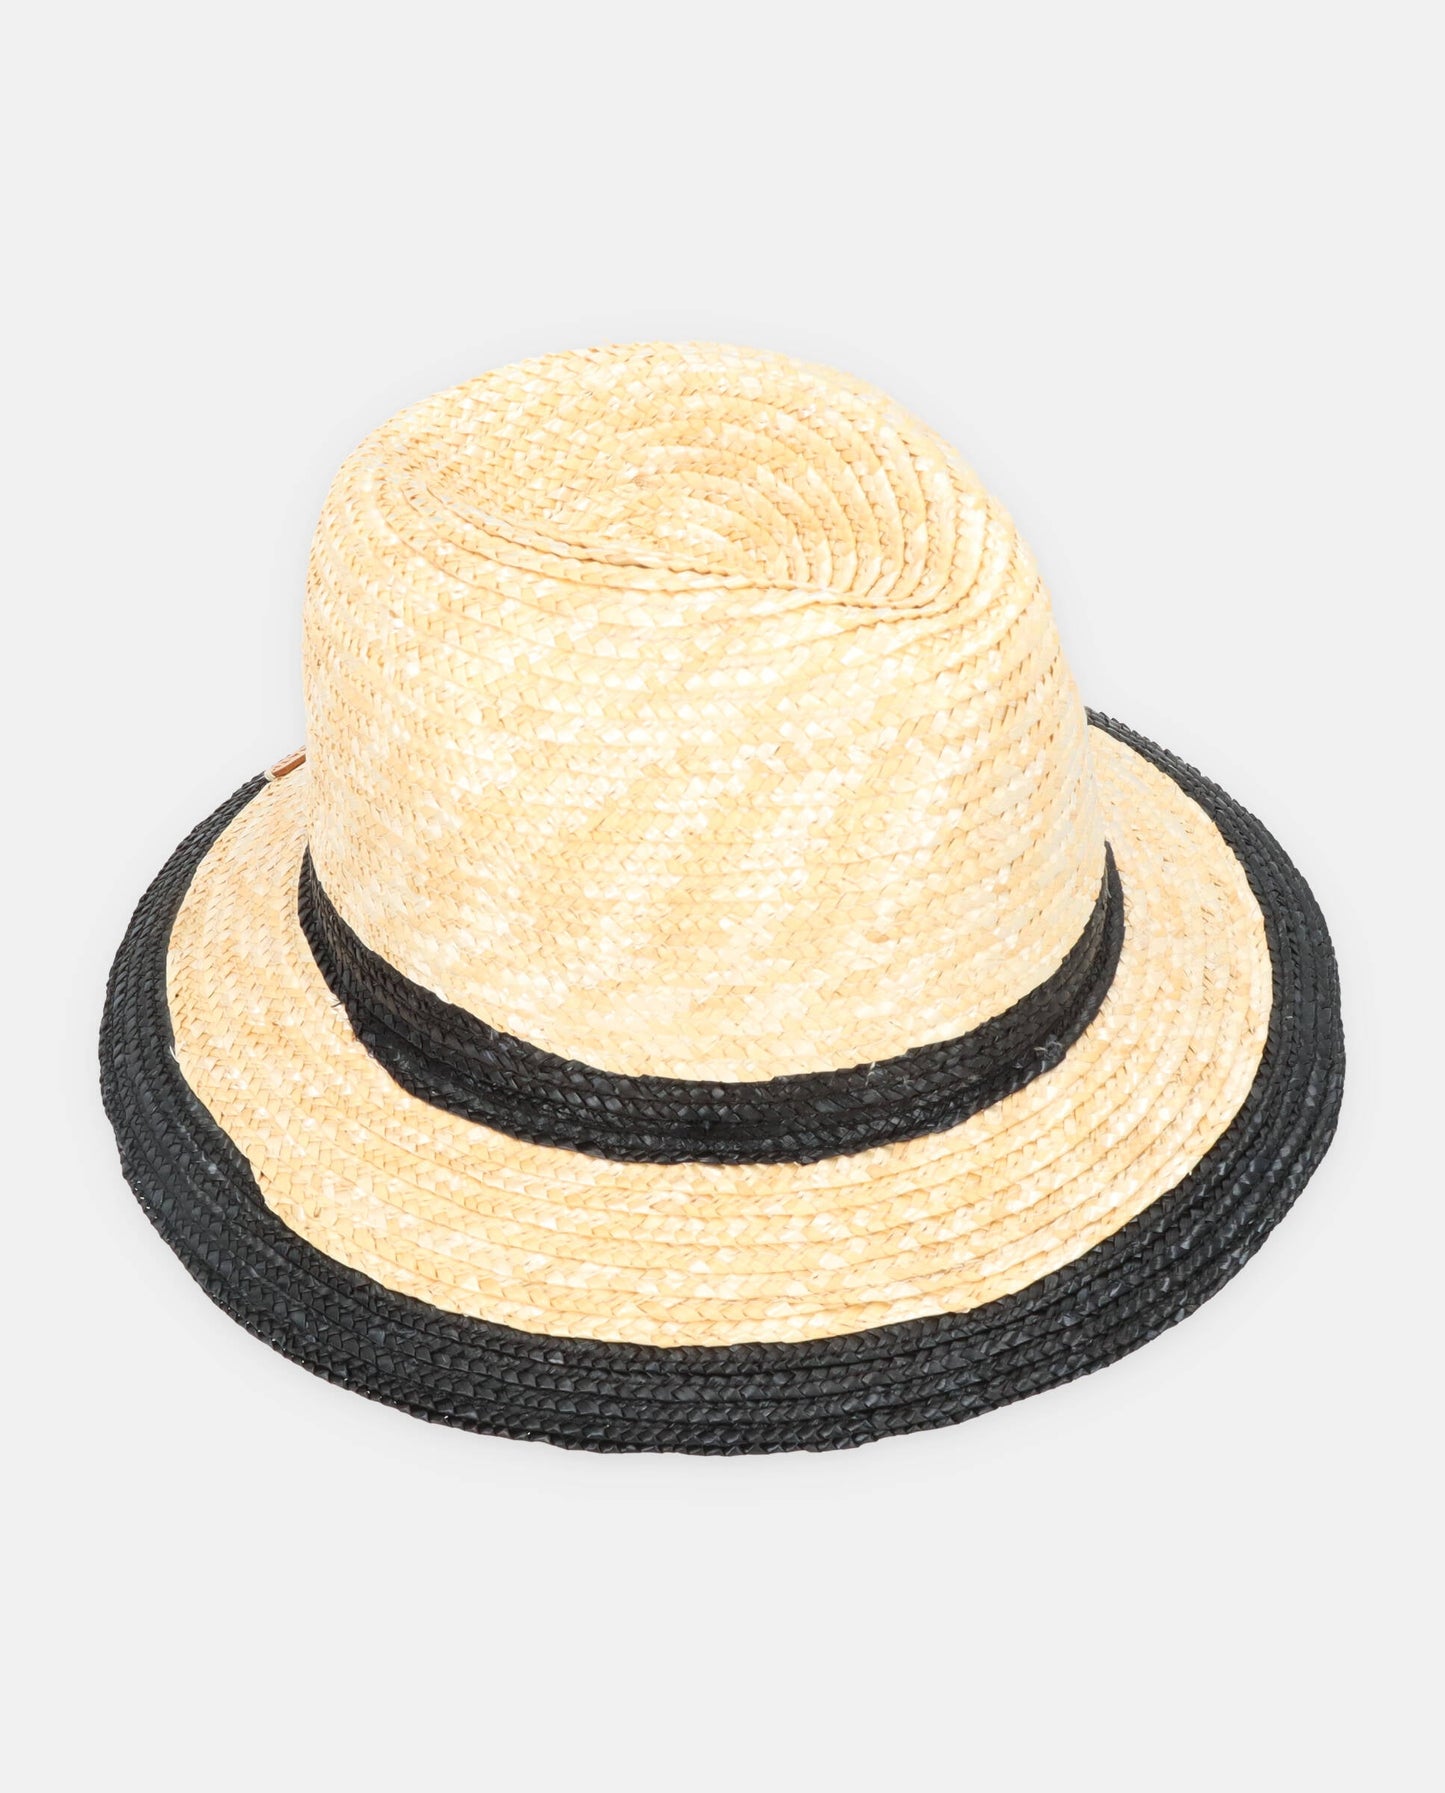 Fedora wing S, two-tone black